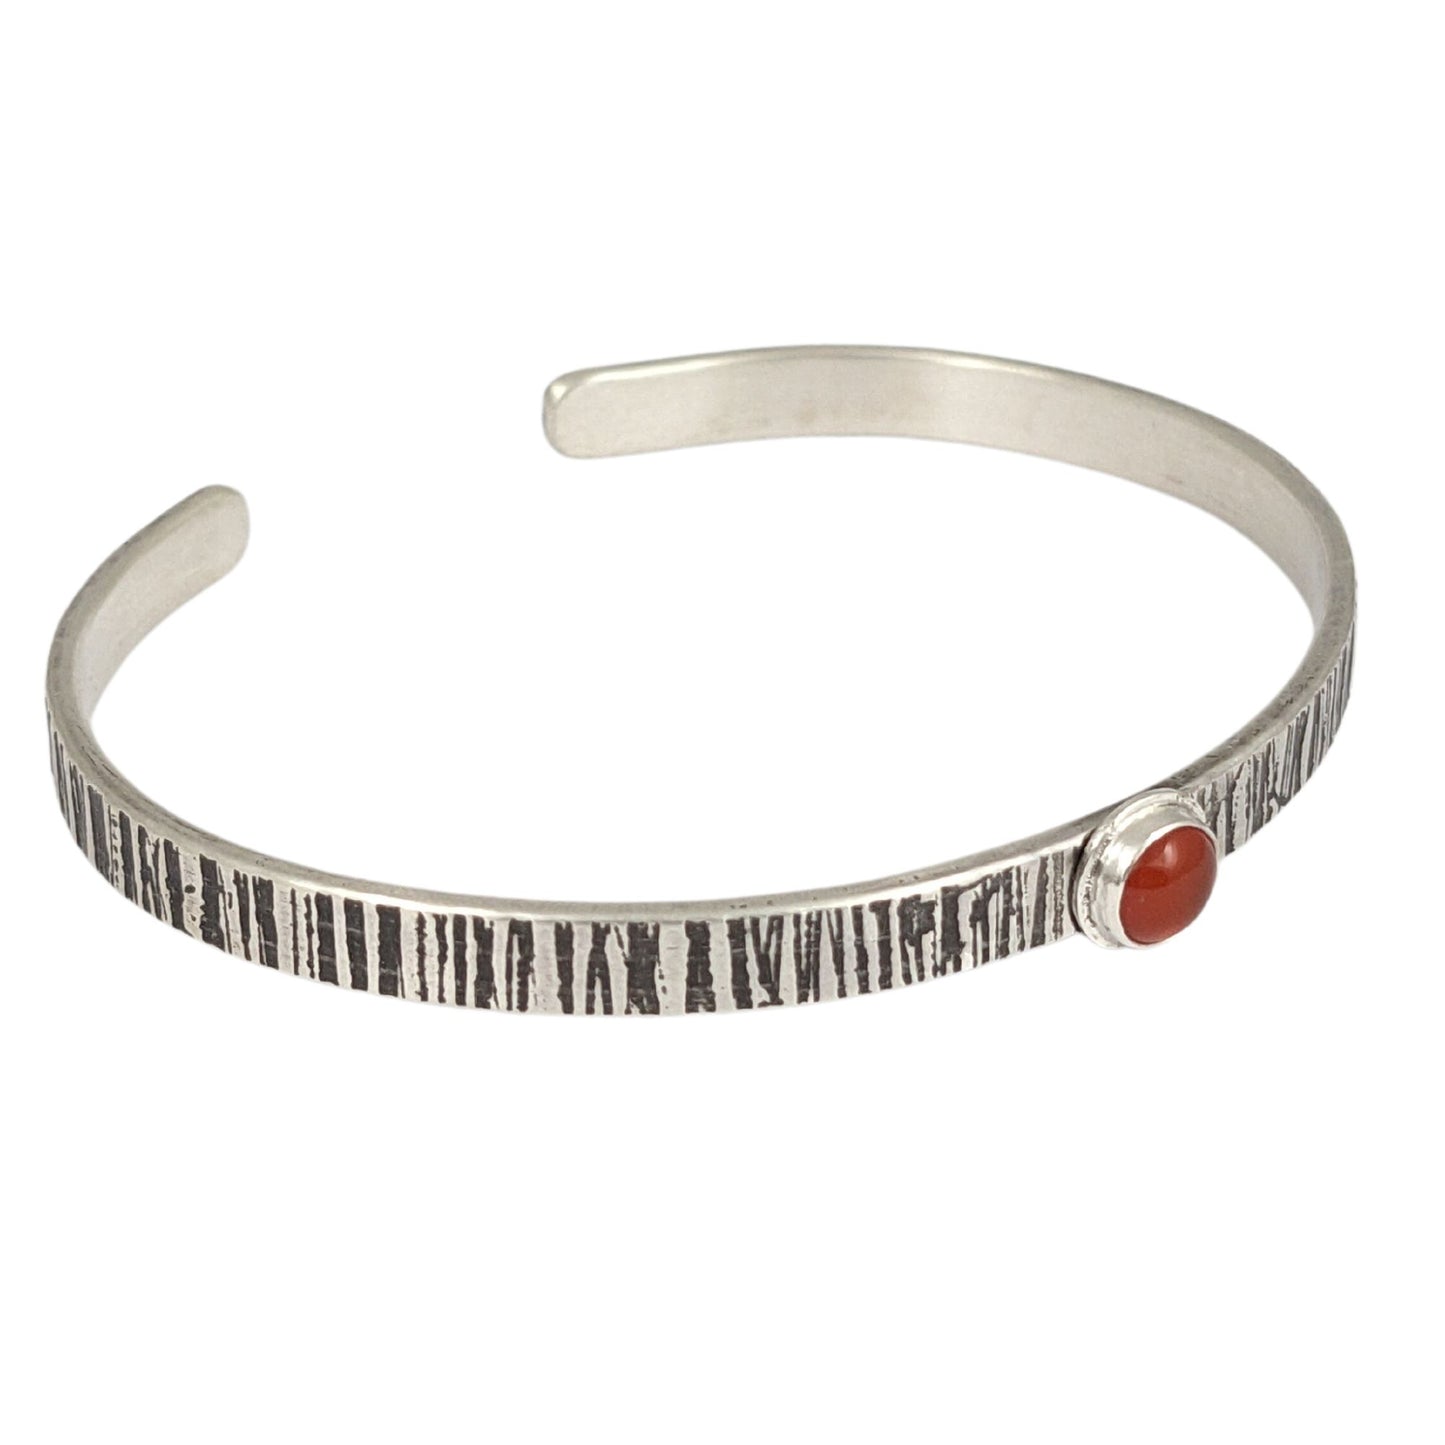 Sterling silver cuff bracelet. The narrow rectangular bracelet has a random lines texture that is oxidized to darken the design. In the middle is an orange carnelian gemstone. The gemstone is round on top.